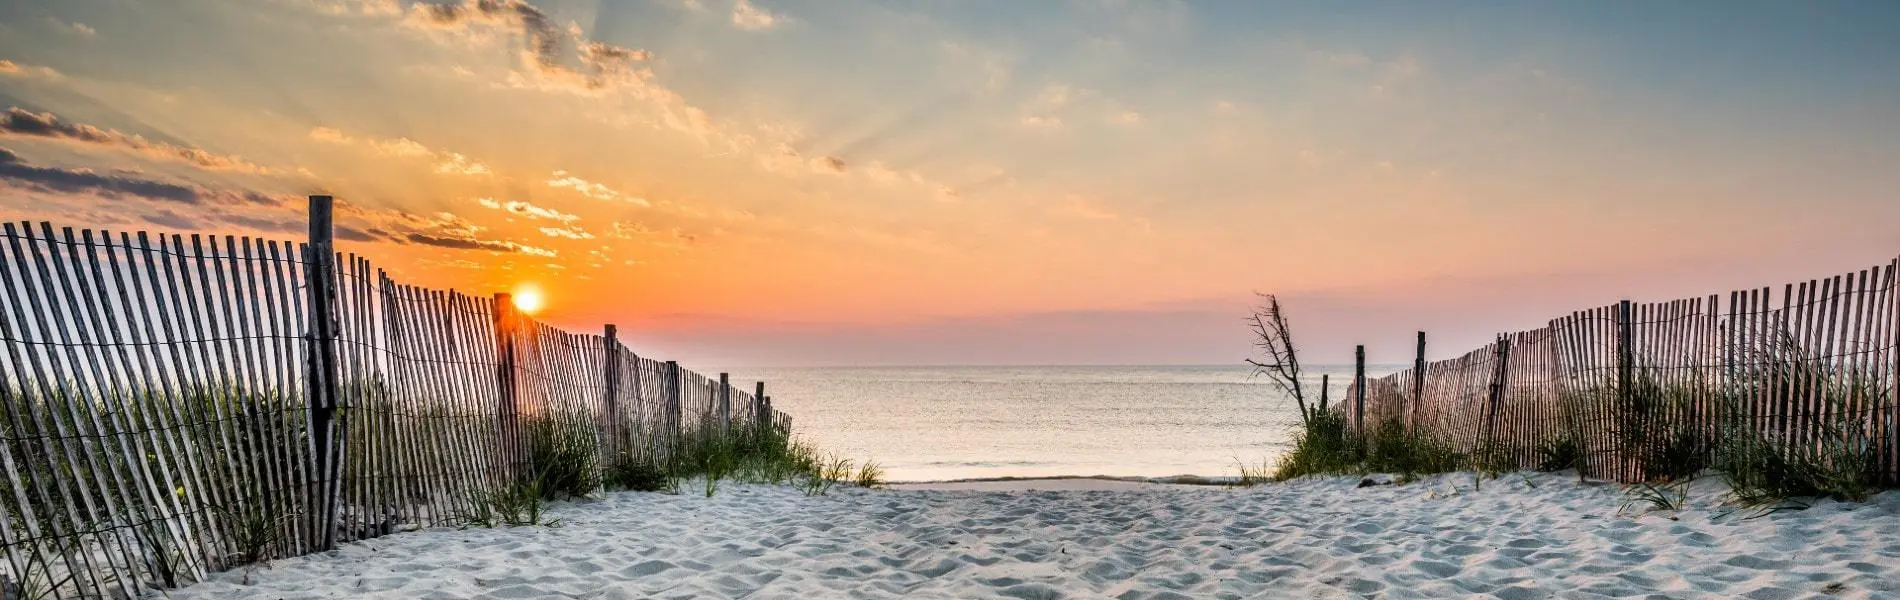 Sandy path to beach in Bethany Beach, Delaware at sunrise